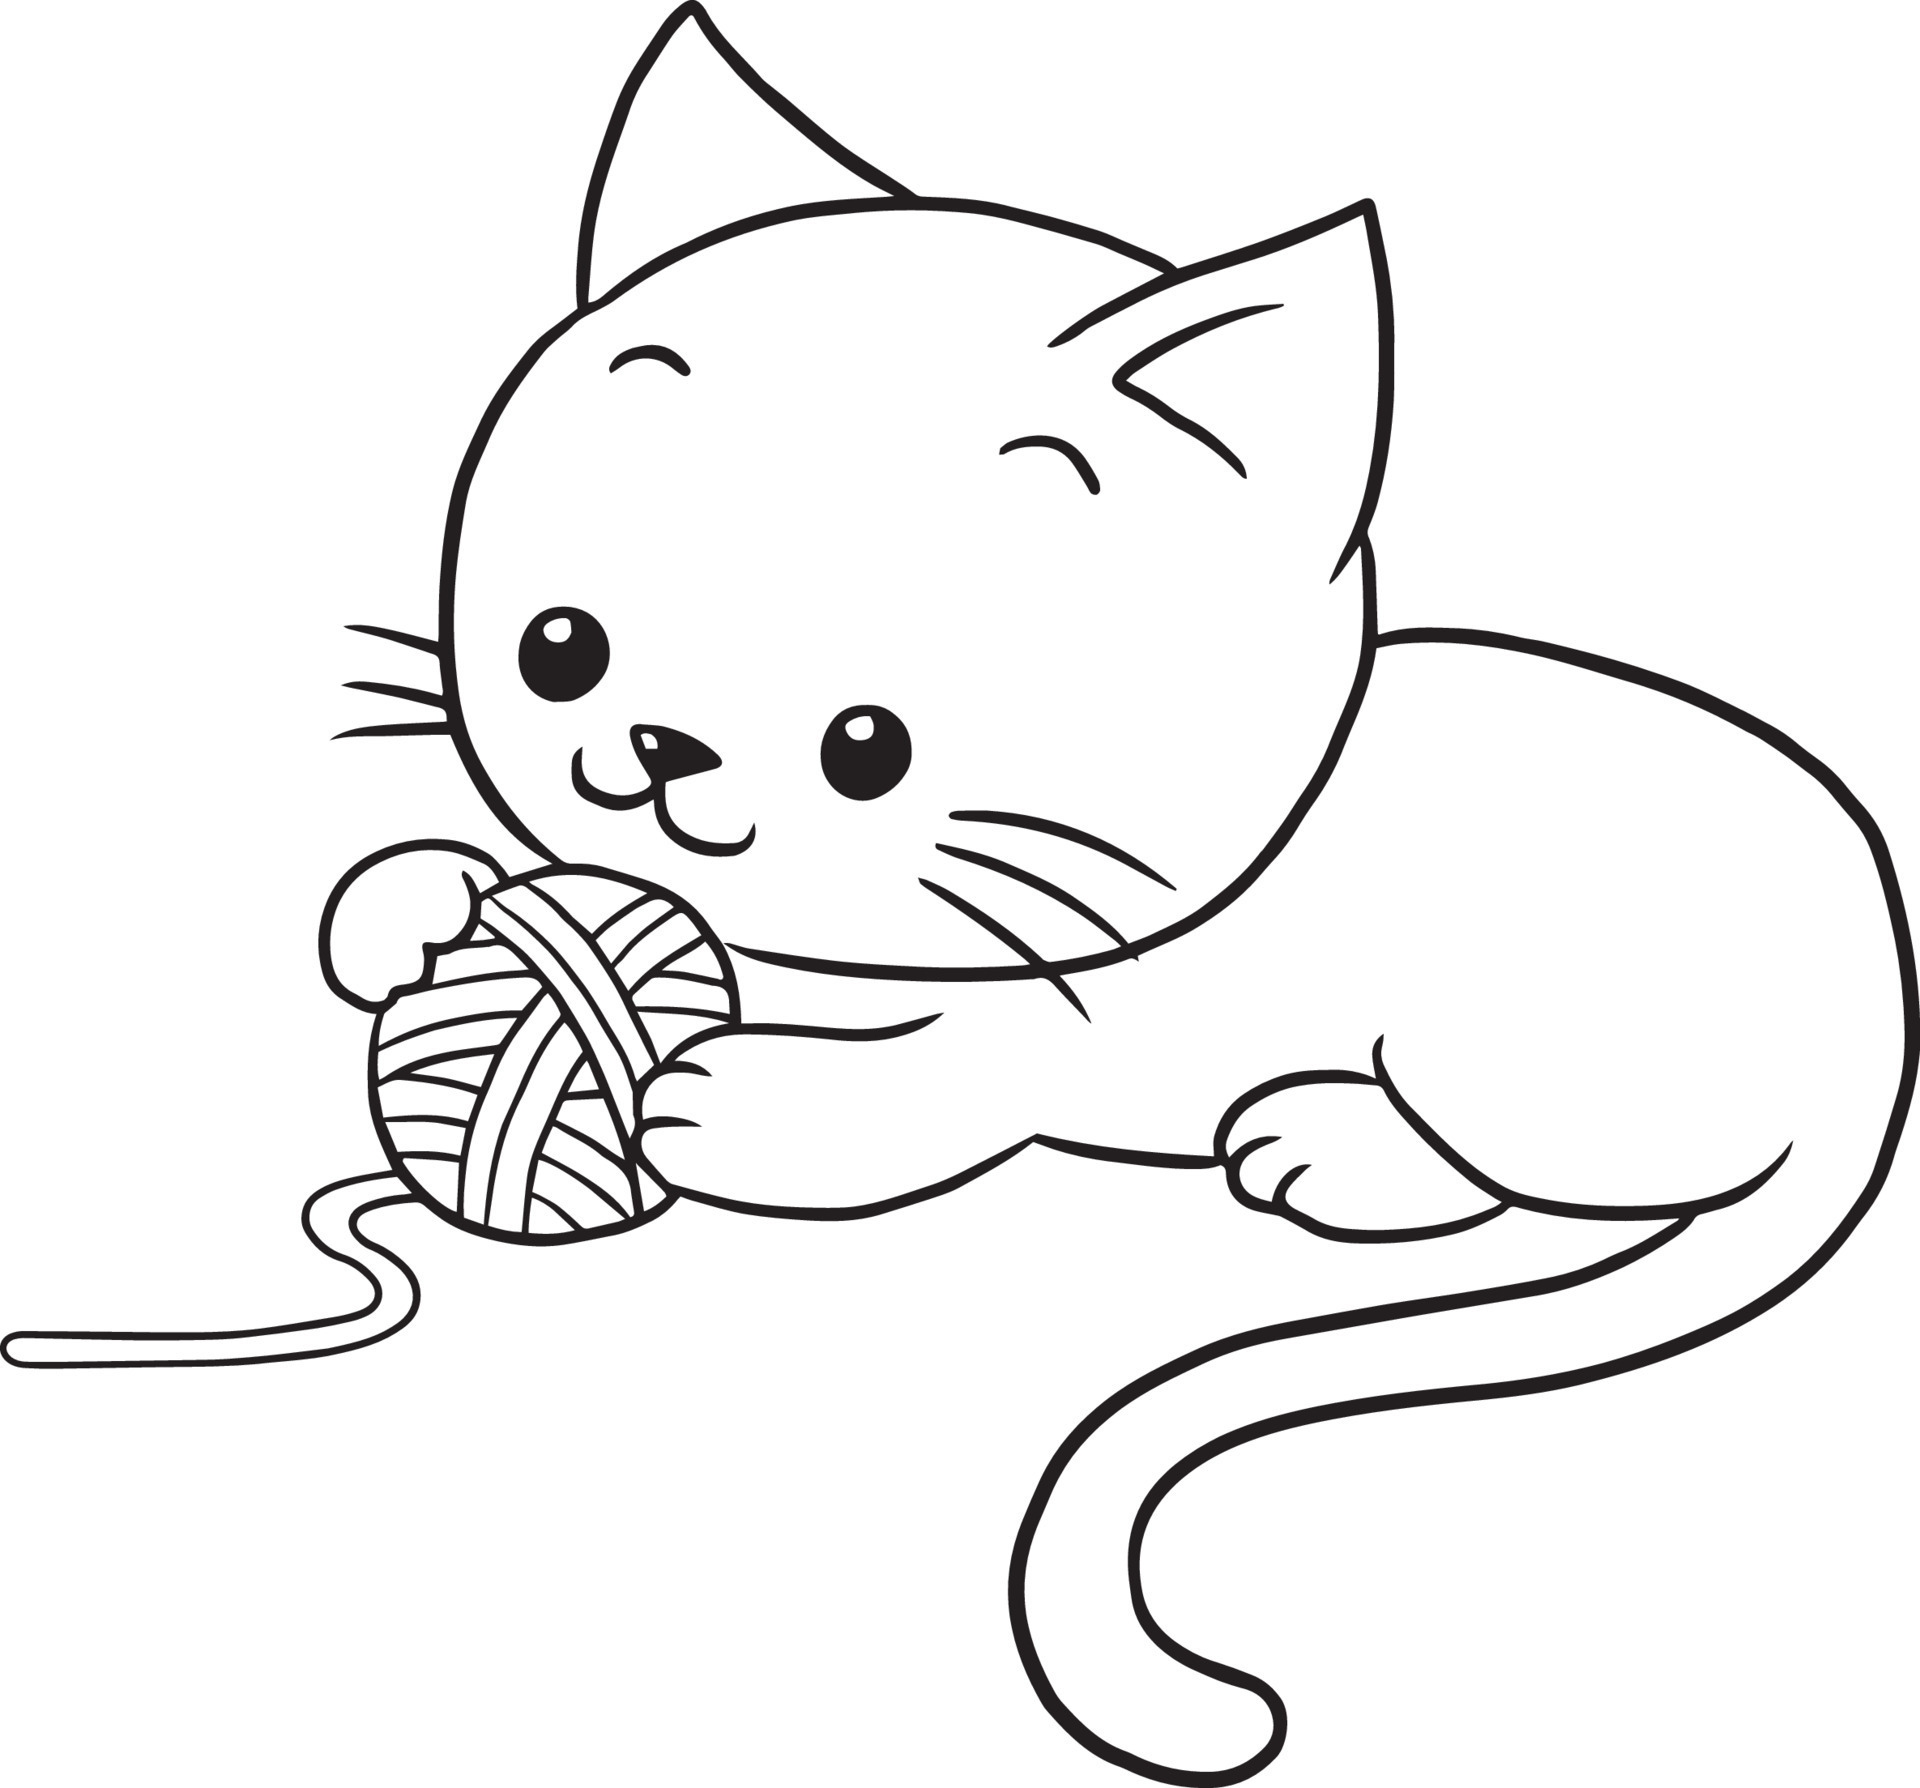 Pin on free coloring pages